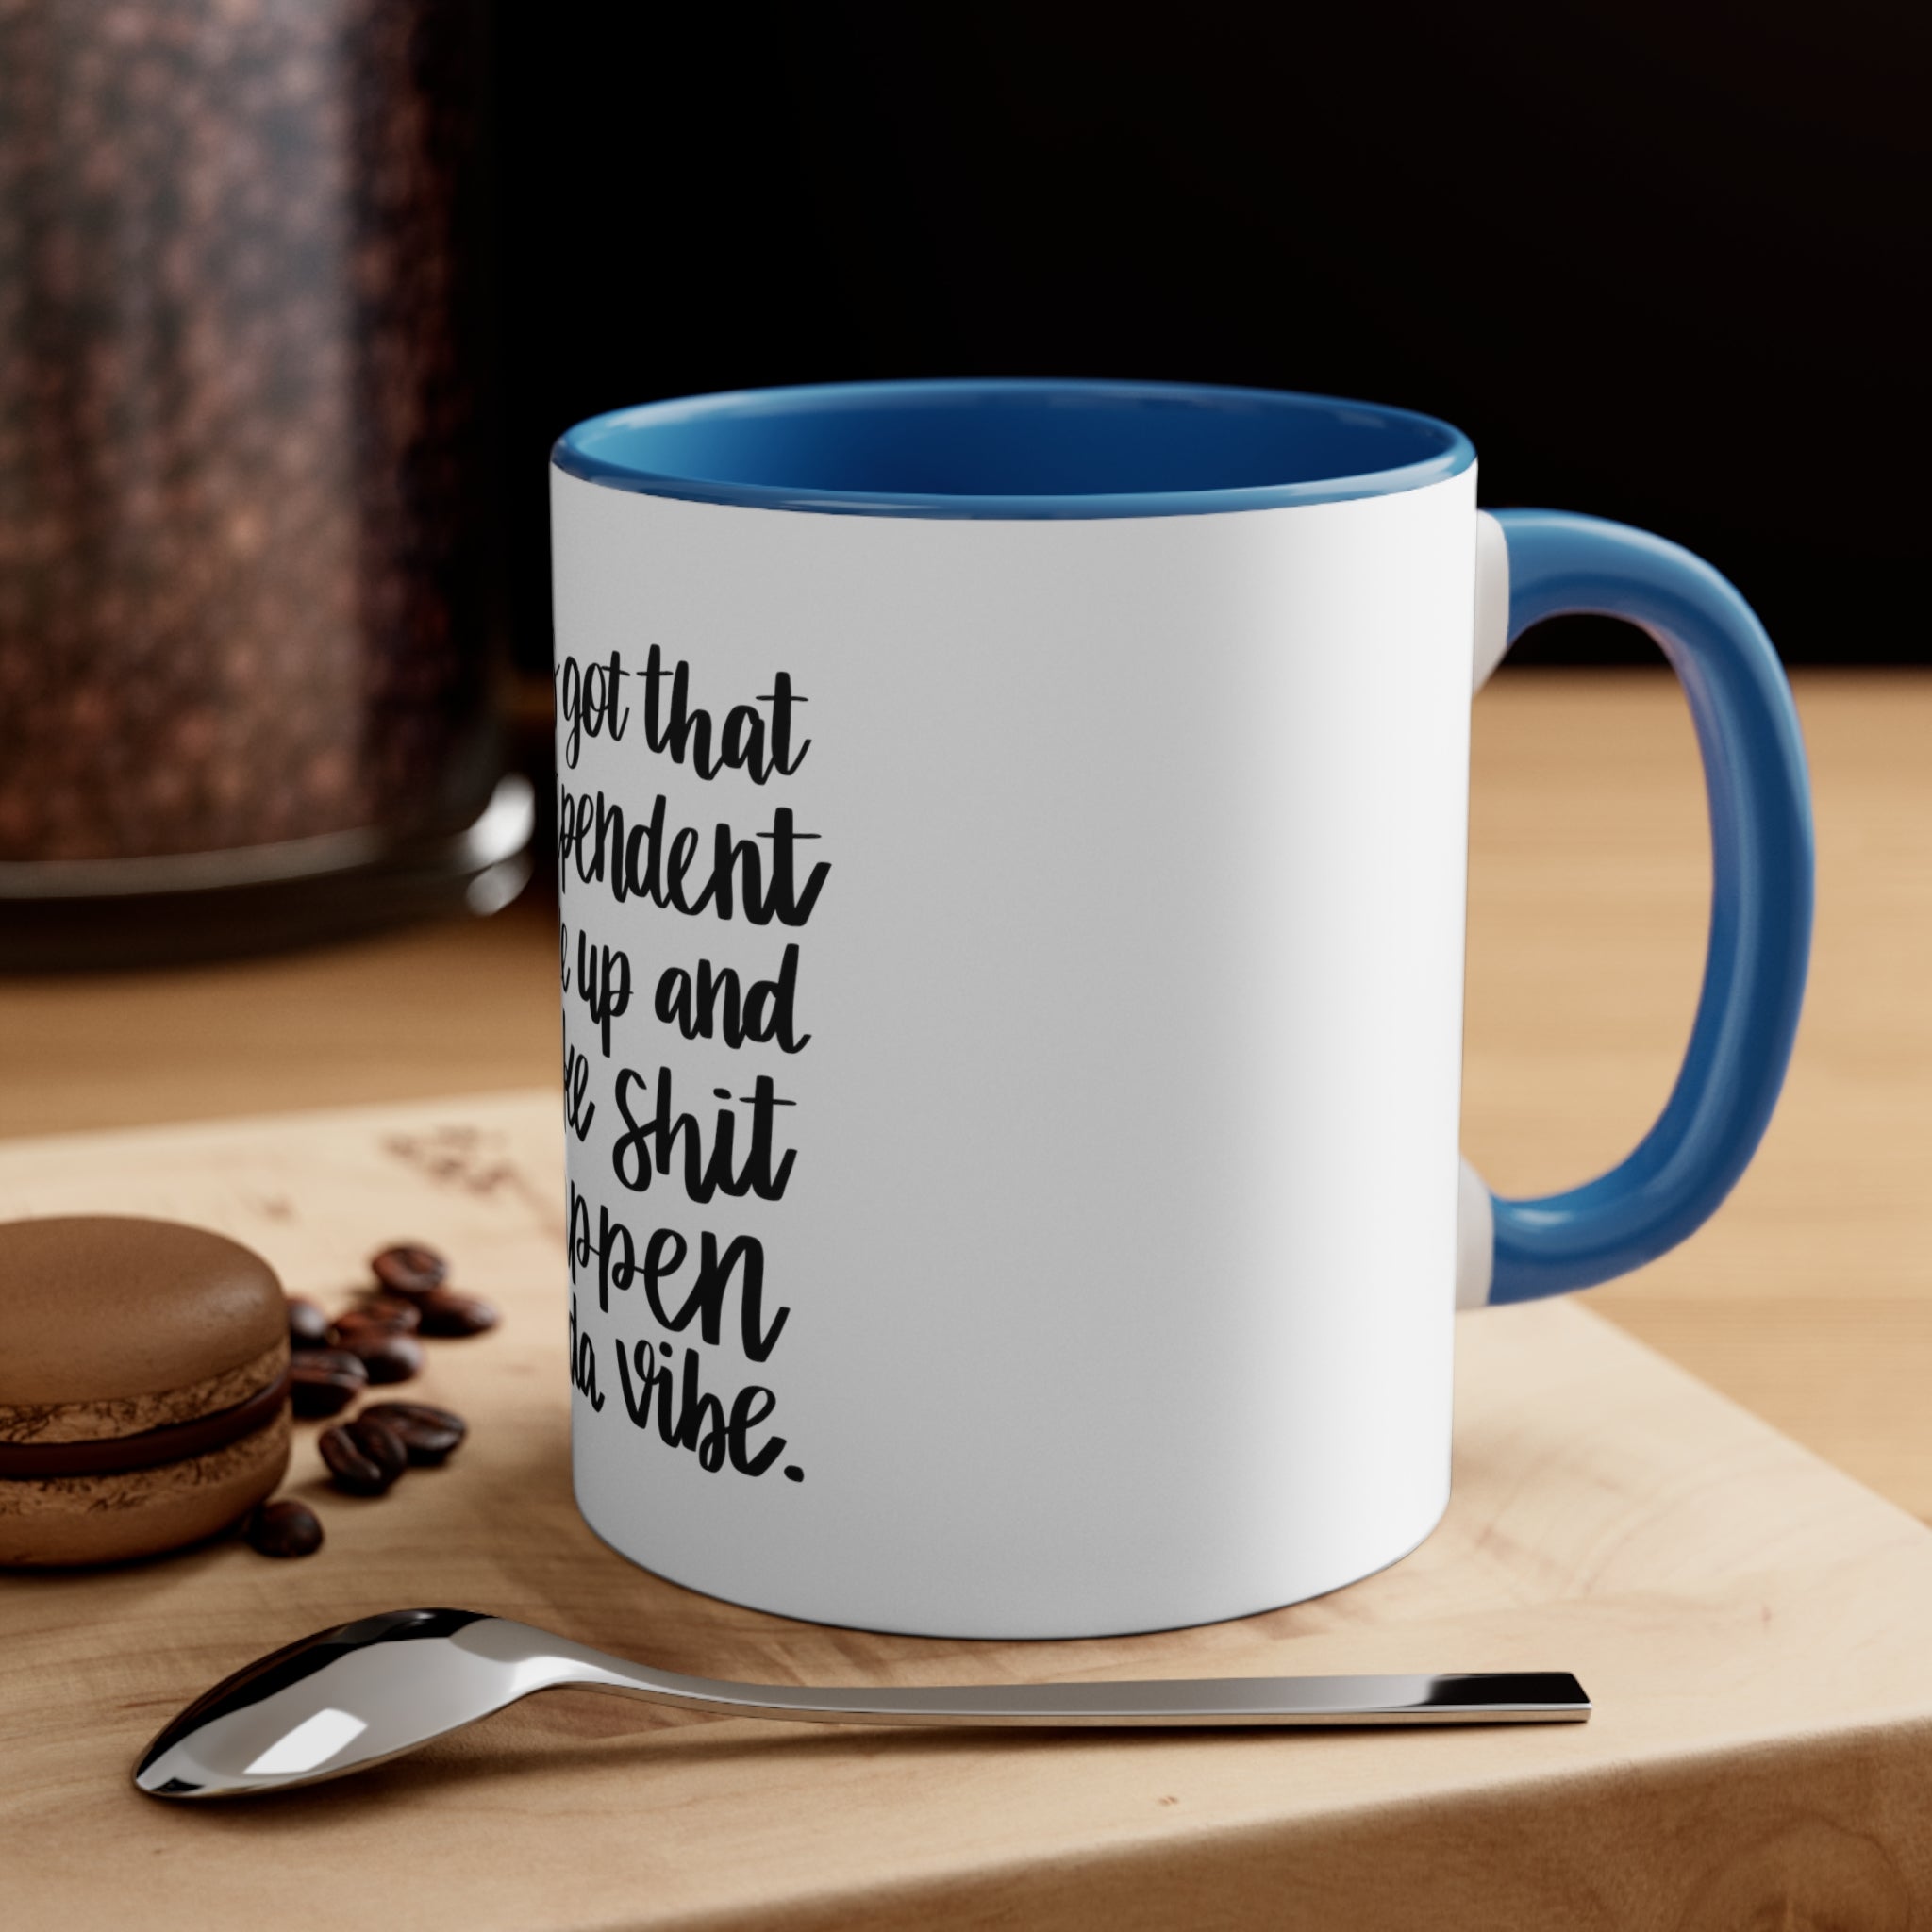 She's Got That Independent Accent Coffee Mug, 11oz